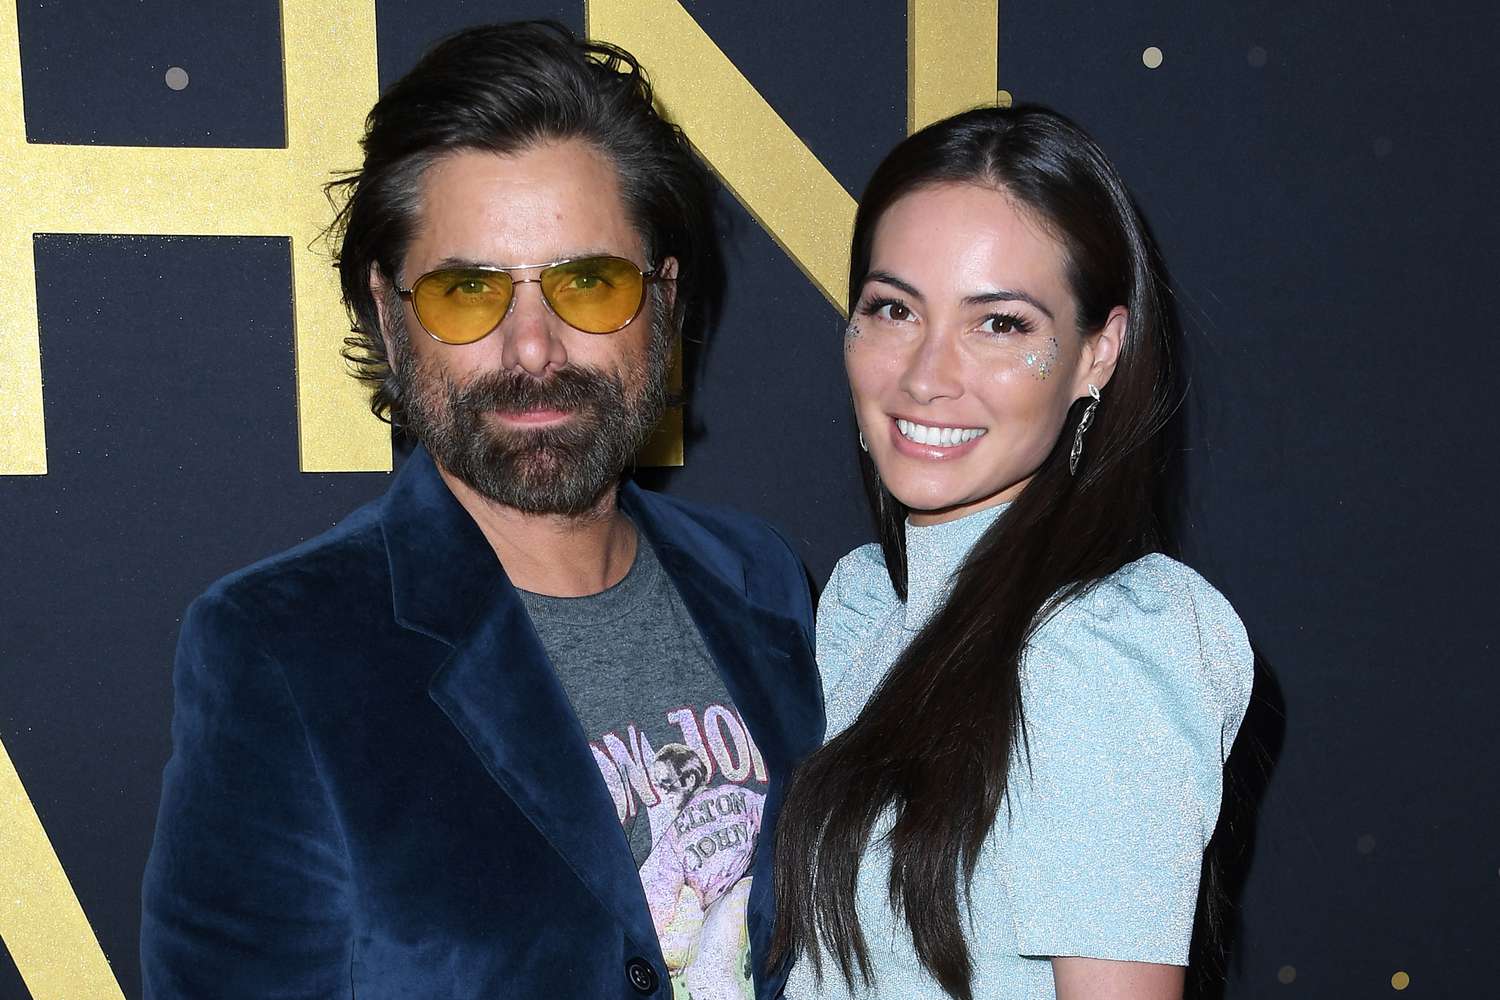 John Stamos Wishes His 'Incredible' Wife Caitlin McHugh a Happy Birthday